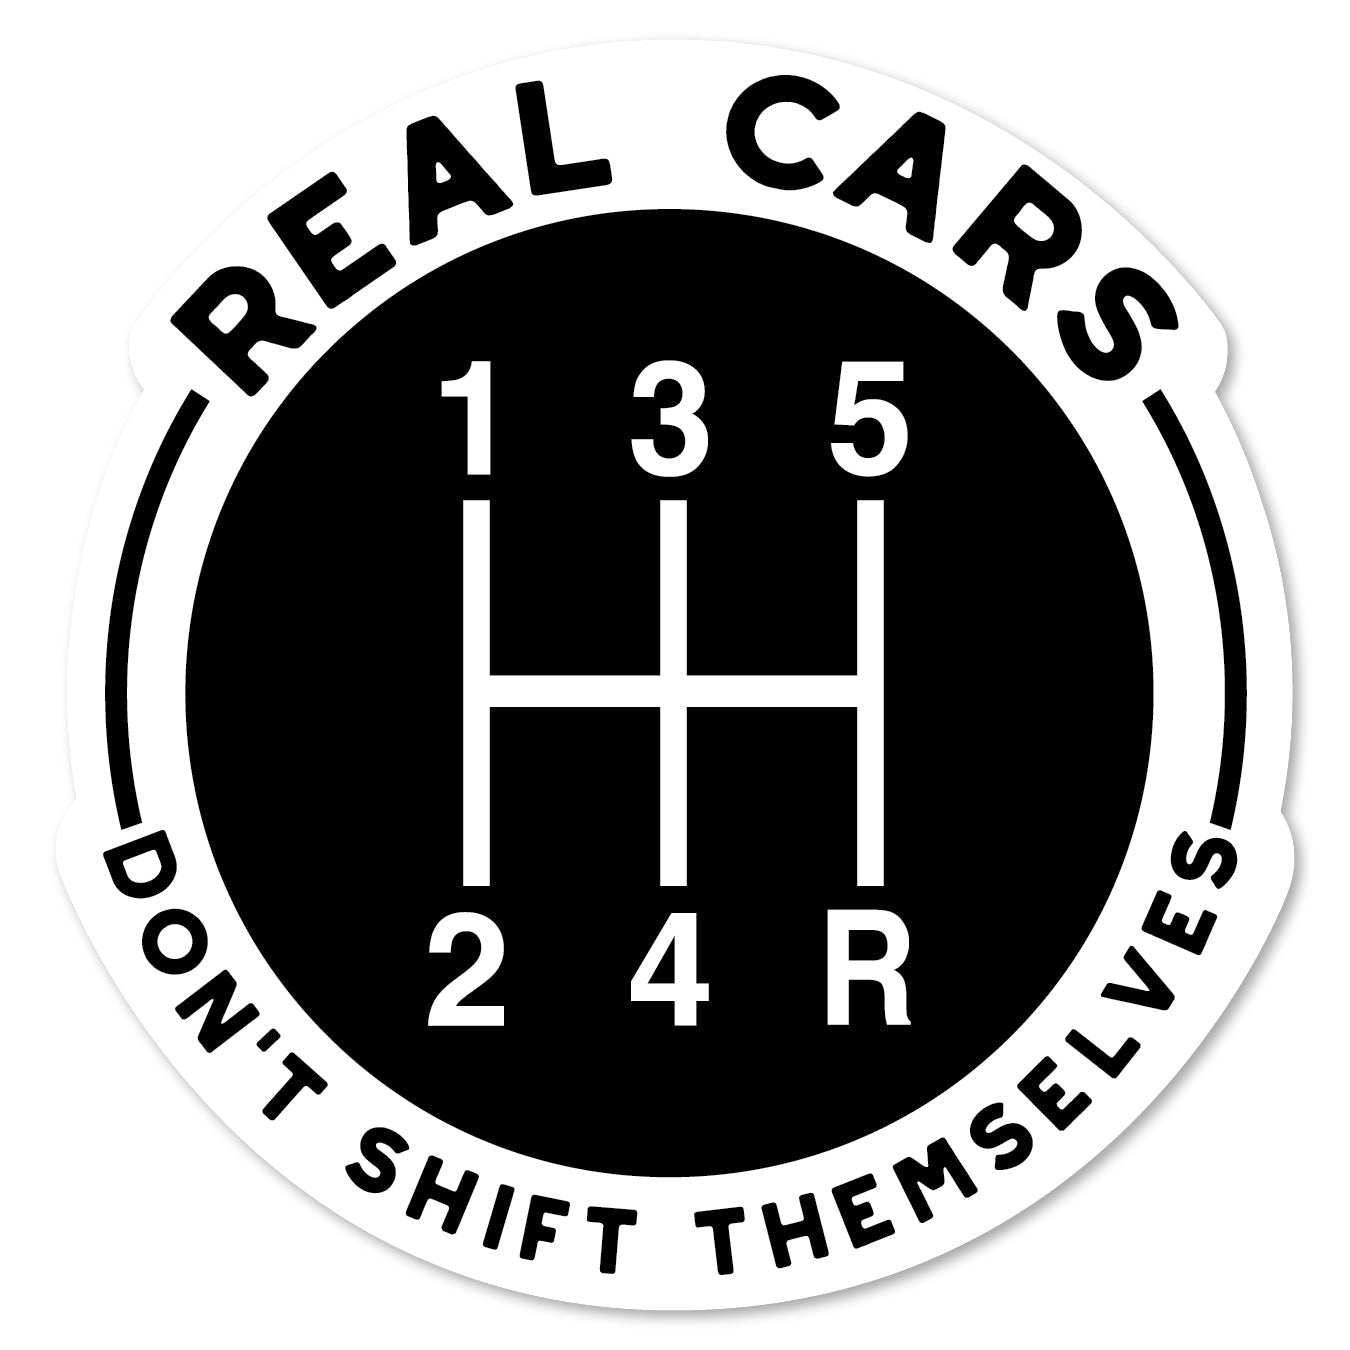 KC5-241 | Real Cars Don't Shift Themselves